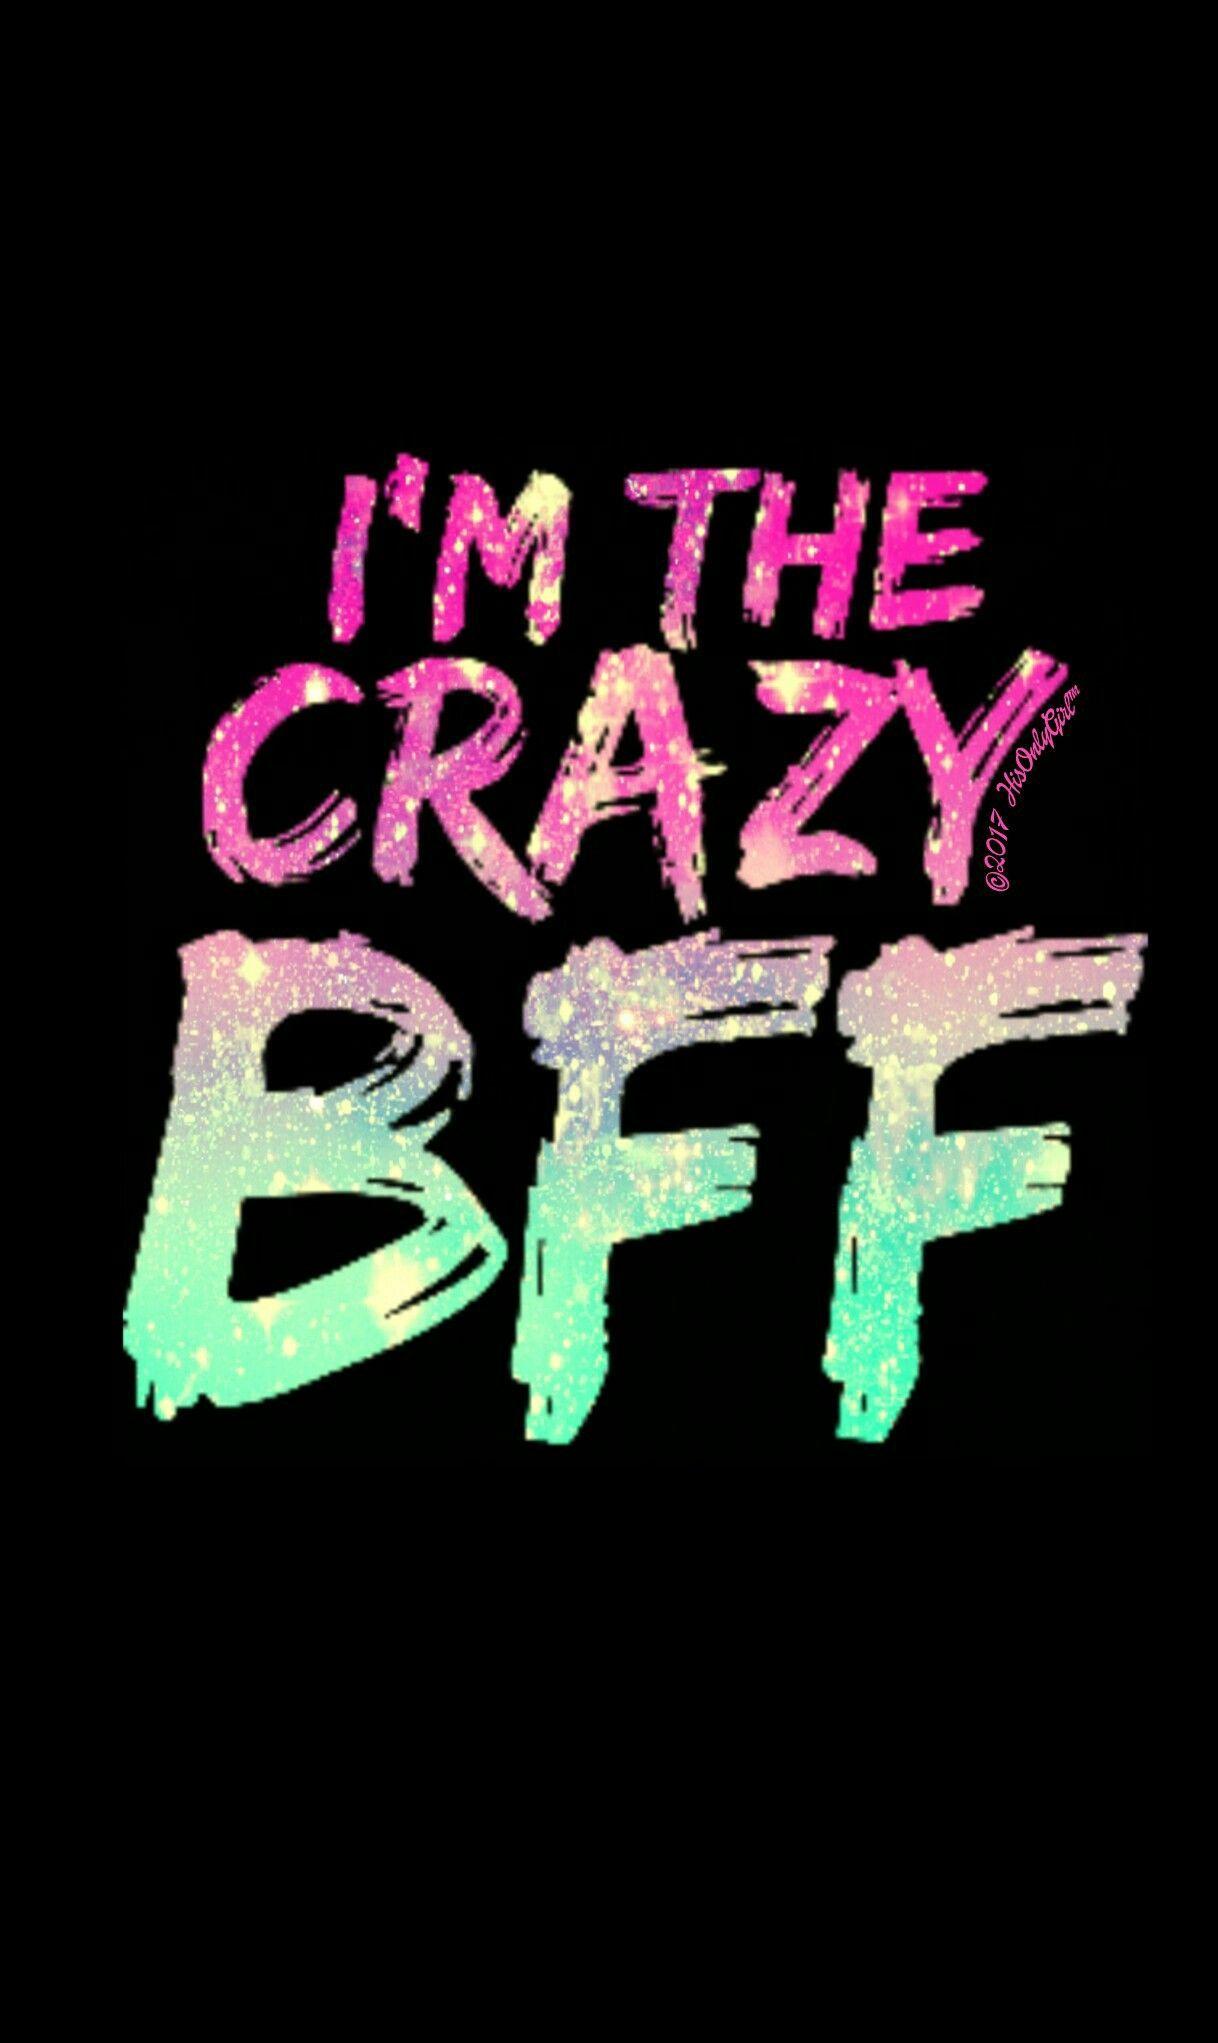 Crazy BFF galaxy wallpaper I created for the app CocoPPa!. Blesk